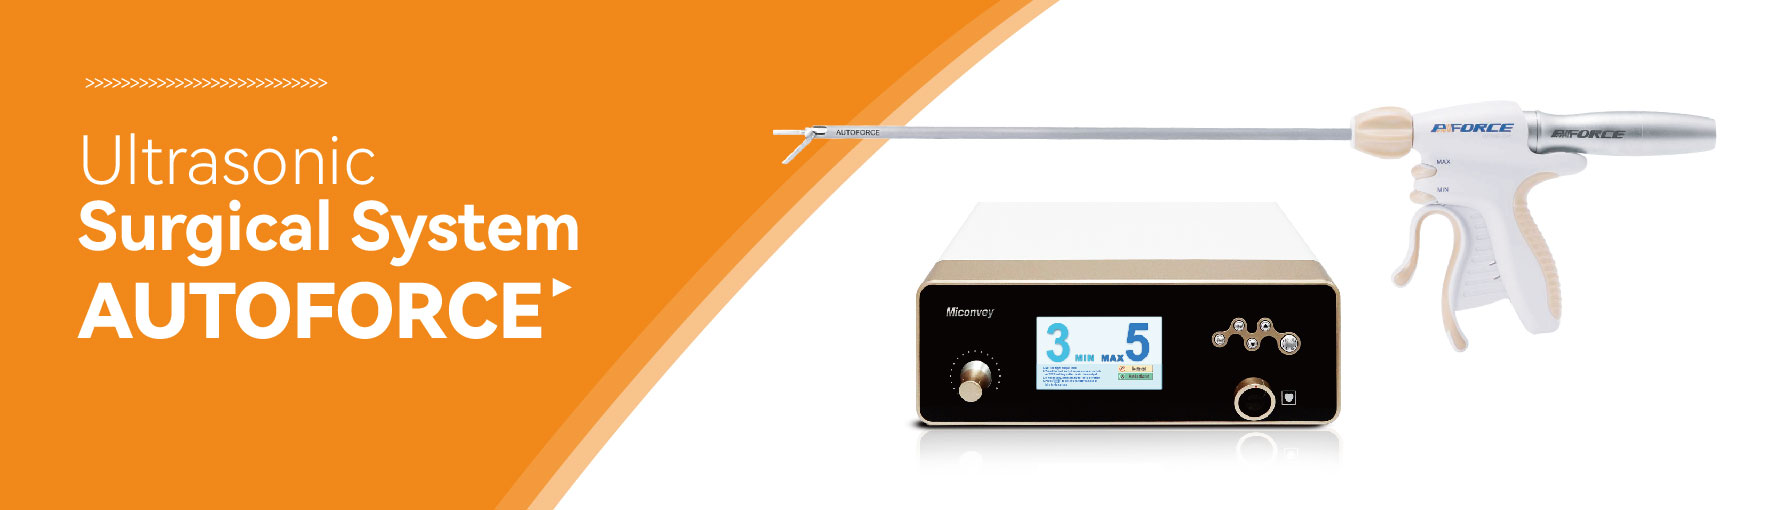 Ultrasonic Surgical Devices-Harmonic Scalpel System